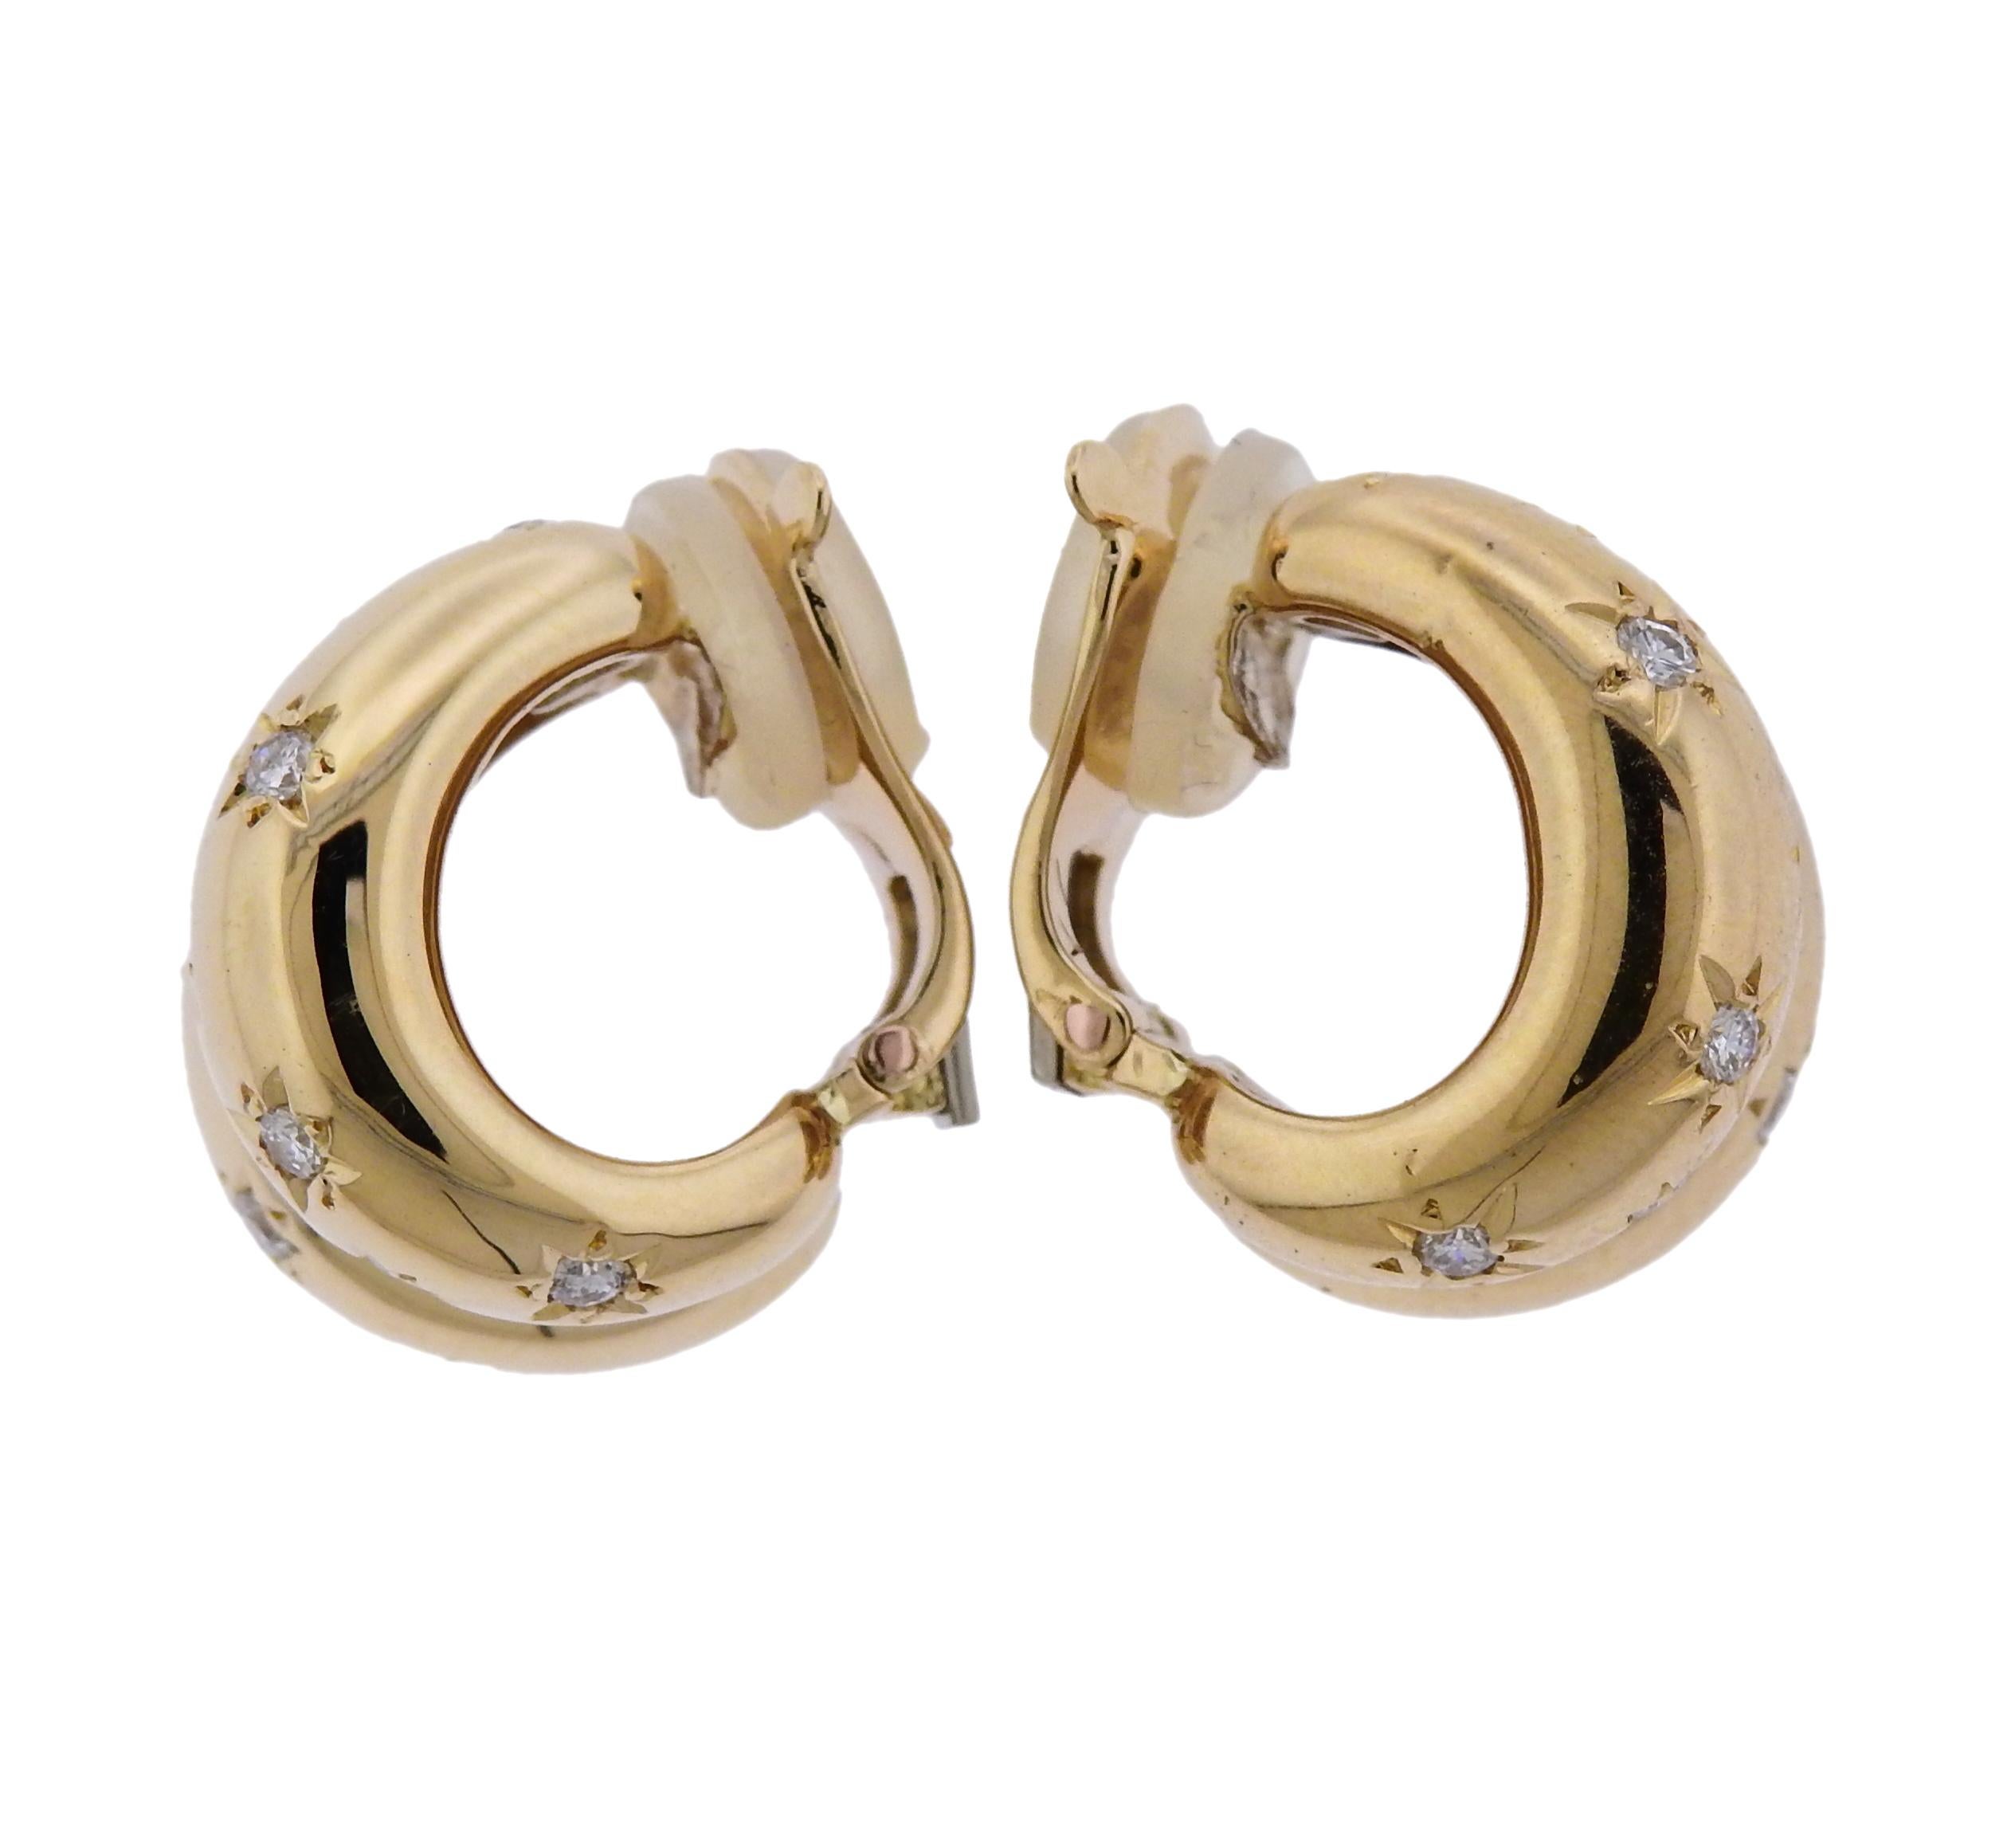 18k yellow gold hoop earrings, crafted by Van Cleef & Arpels, adorned with a total of 0.50ctw in FG/VVS diamonds.  Earrings are 18mm x 13mm, weigh 14.7 grams. Marked: VCA, C3181A5, 0.50ct. 